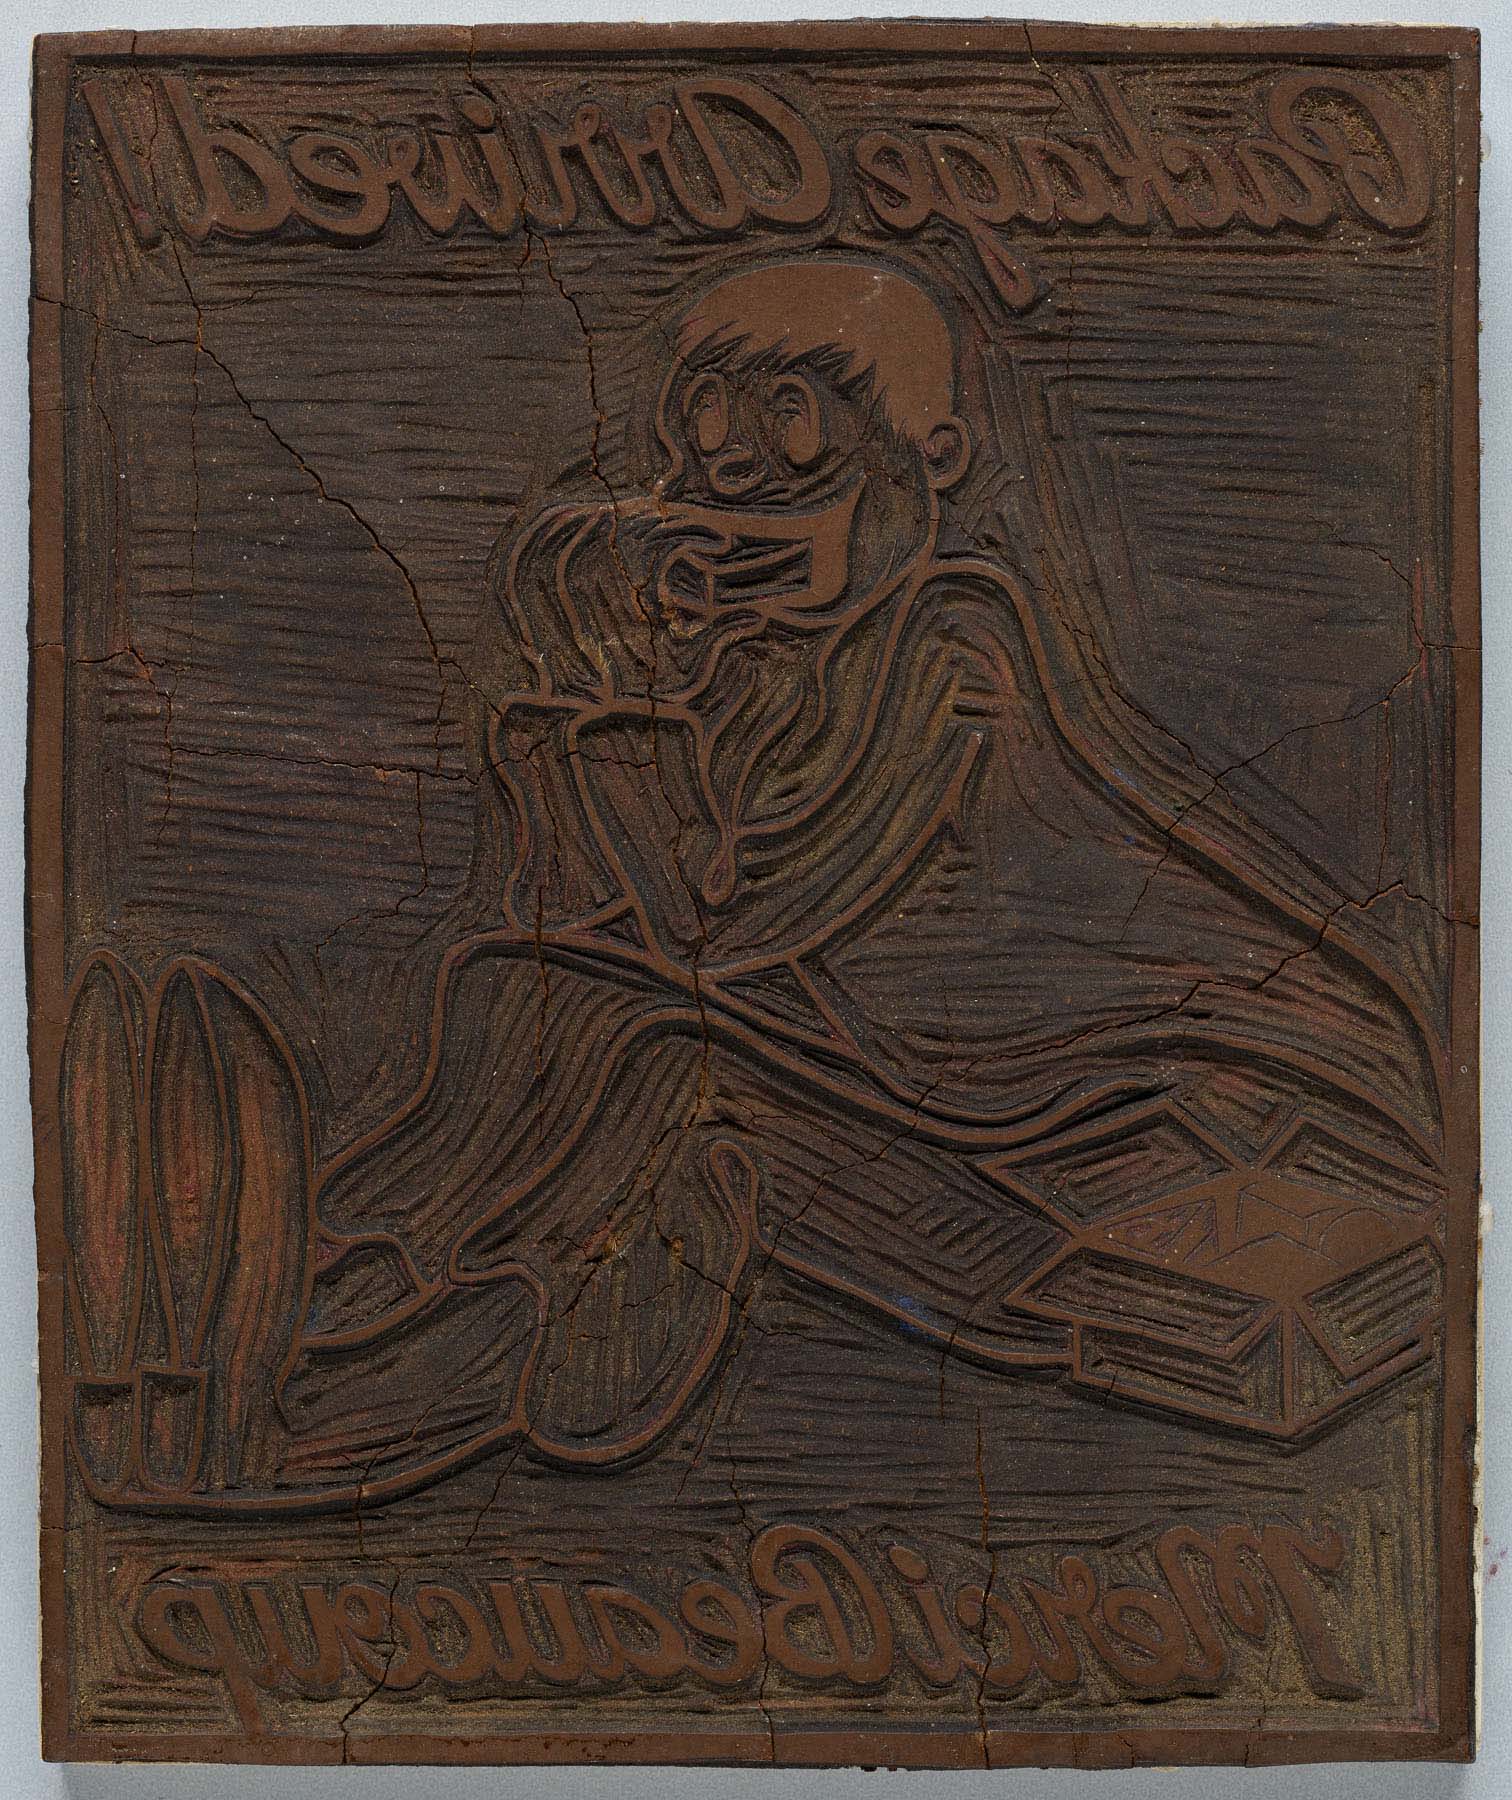 A carved wood block showing an image in reverse of a seated man next to an open package with the words “Package Arrived! Merci Beaucoup.”